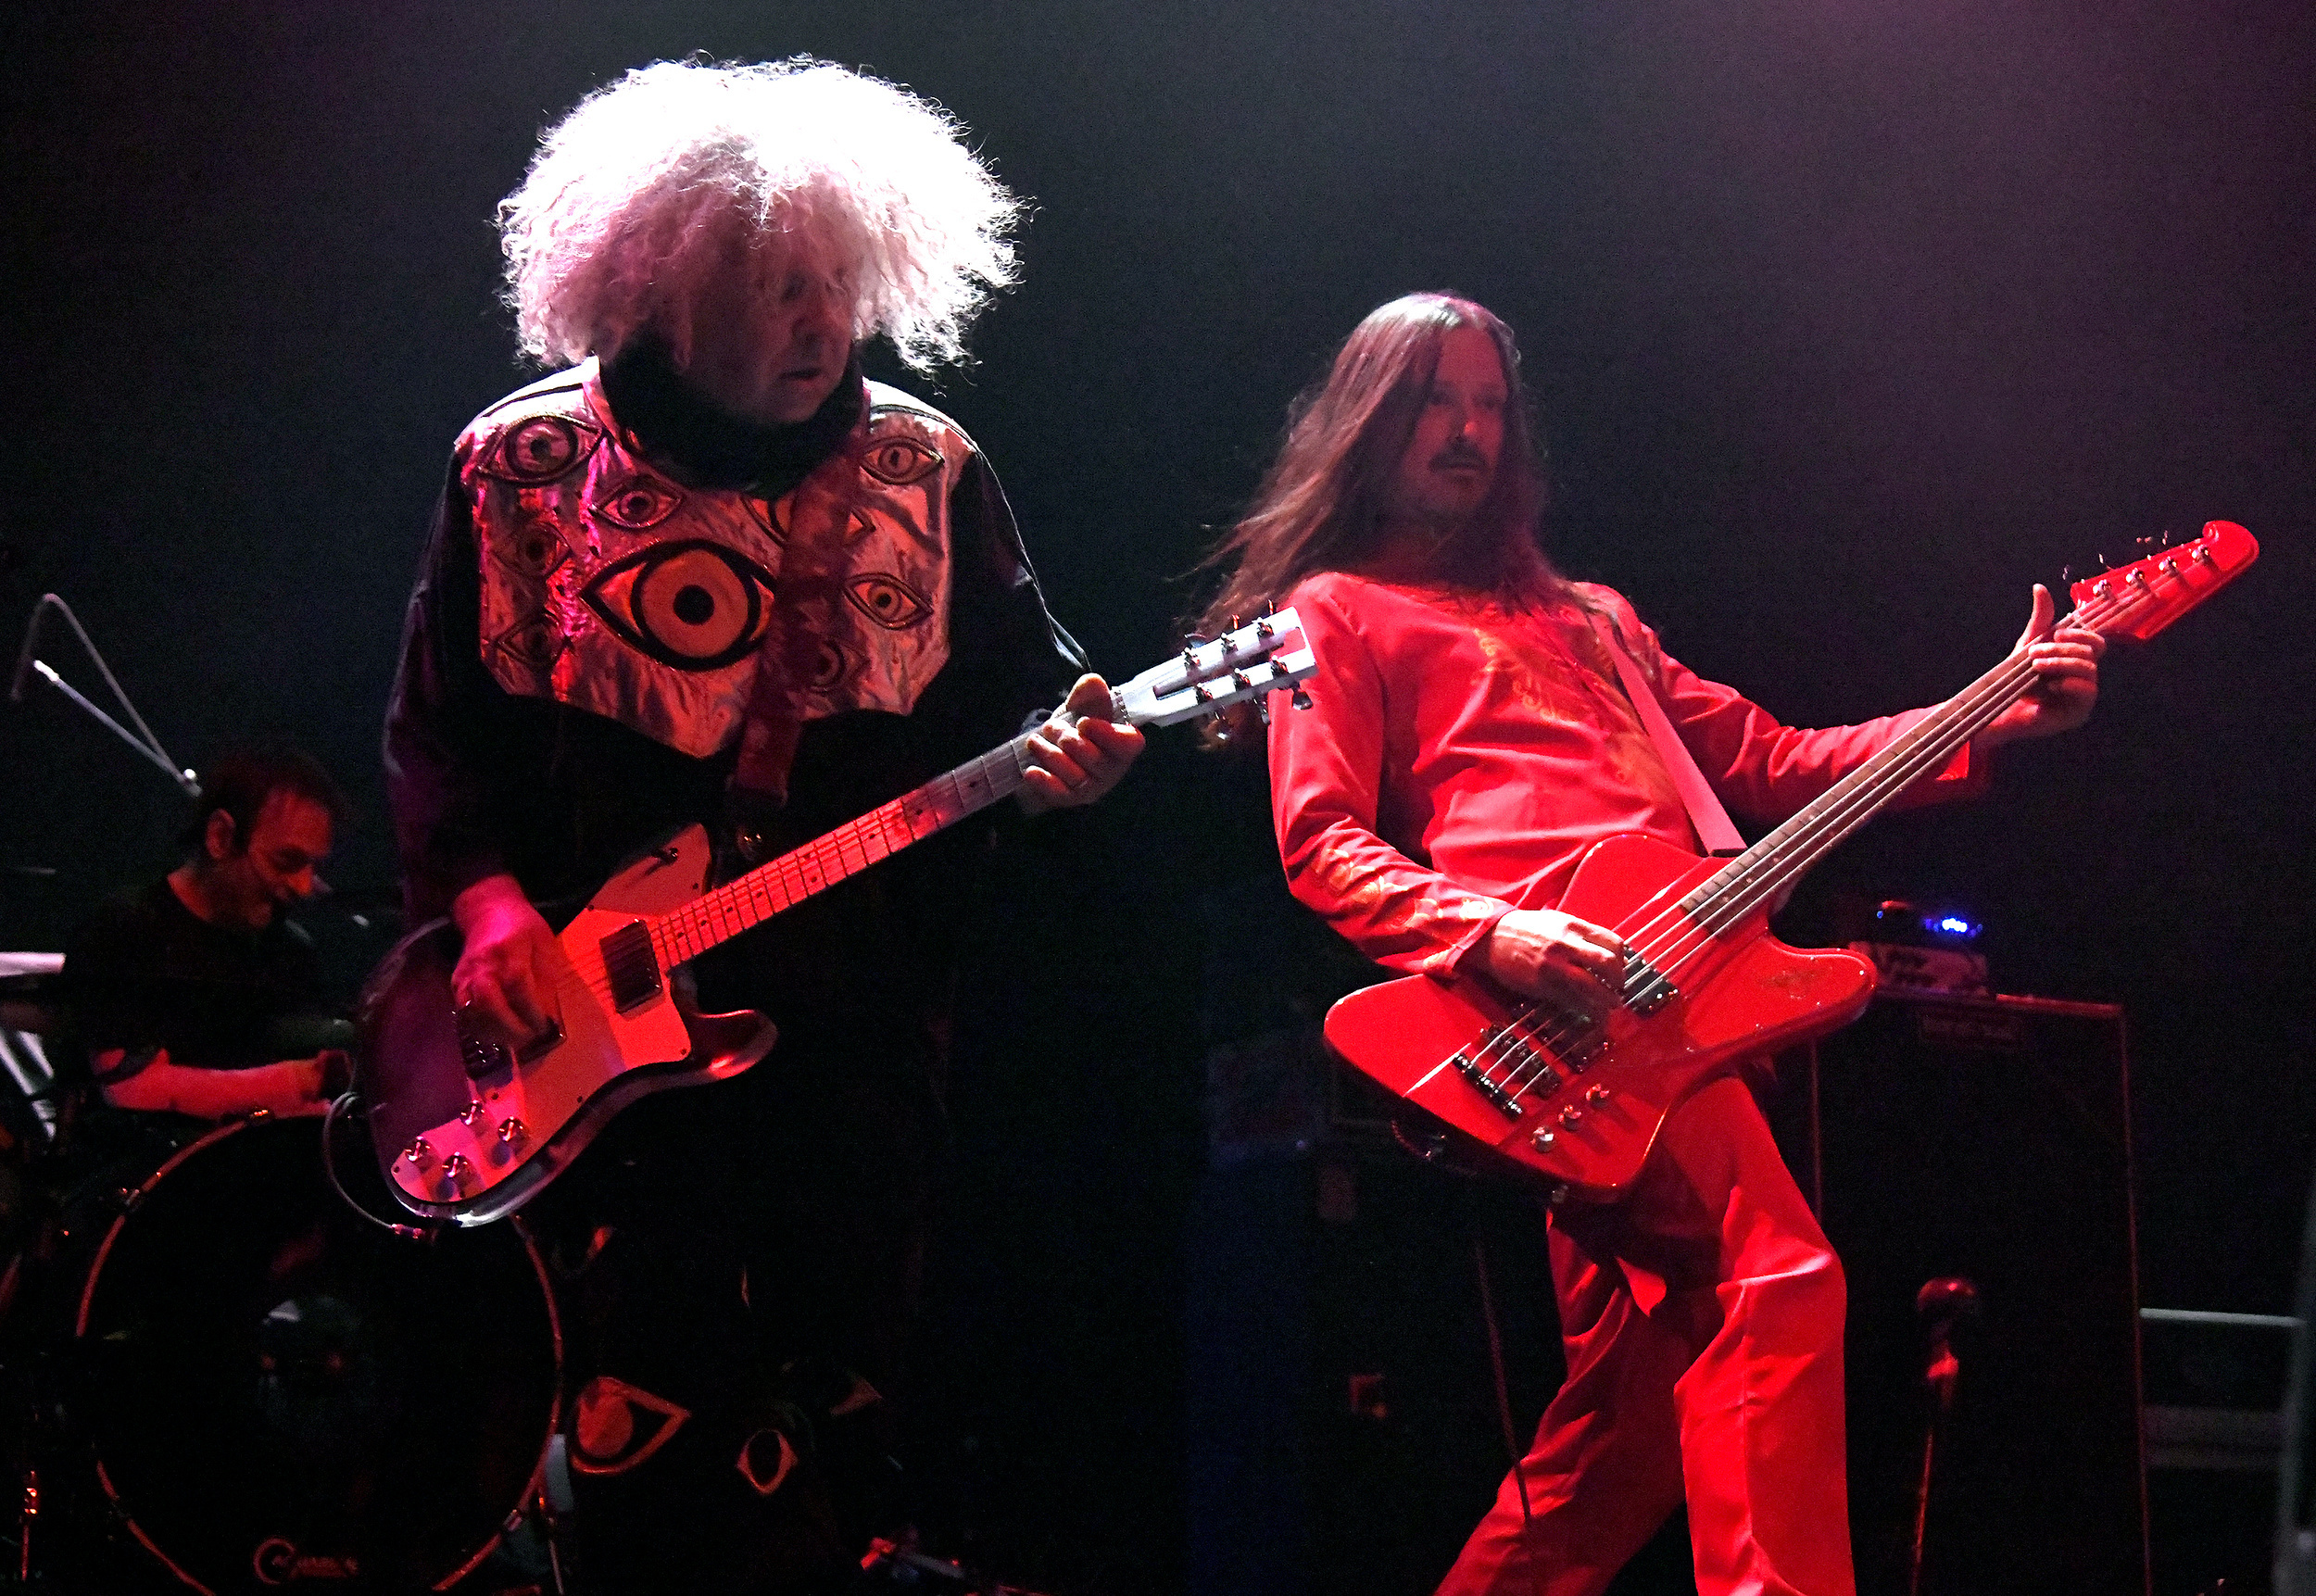 <p>Unlike other quitters on this list, Melvins will never quit — <em>ever</em>. Forty-one years into their career and they've built as large and complex of a discography as anyone has ever seen, with this being their 29th album and an additional 116 singles/EPs under their belts. The band claims that they've never recorded an album in the way that they recorded <em>Tarantula Heart</em>, a five-track album with one of the tracks being over 19 minutes long. The band even roped in friends Roy Mayorga (Ministry) and Gary Chester (WE Are The Asteroid) to help out. Whatever this album is, it won't be like anything else.</p><p><a href='https://www.msn.com/en-us/community/channel/vid-cj9pqbr0vn9in2b6ddcd8sfgpfq6x6utp44fssrv6mc2gtybw0us'>Follow us on MSN to see more of our exclusive entertainment content.</a></p>